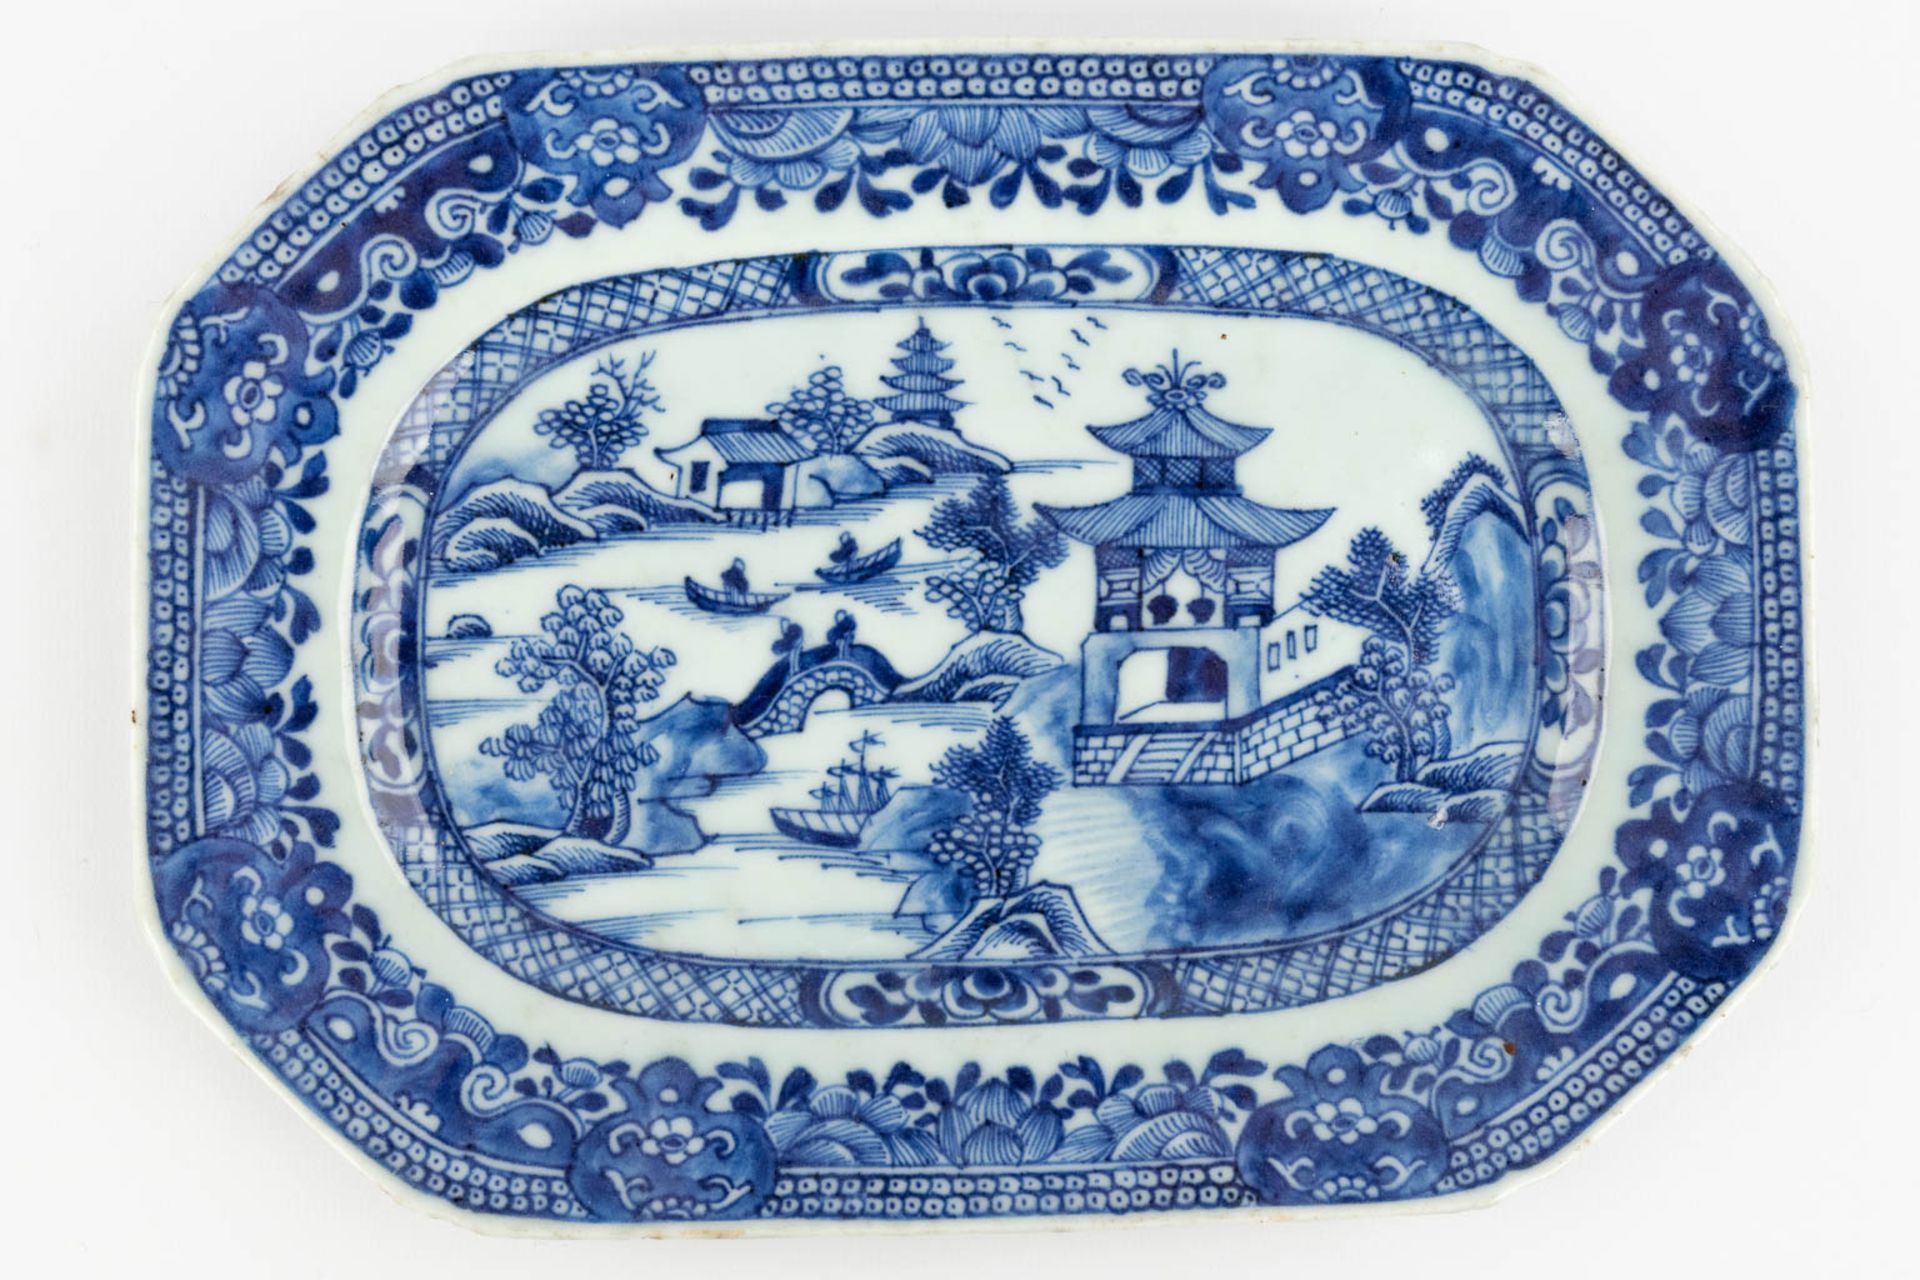 A collection of 7 Chinese plates and platters made of blue-white porcelain. (34 x 40,5 cm) - Image 20 of 23